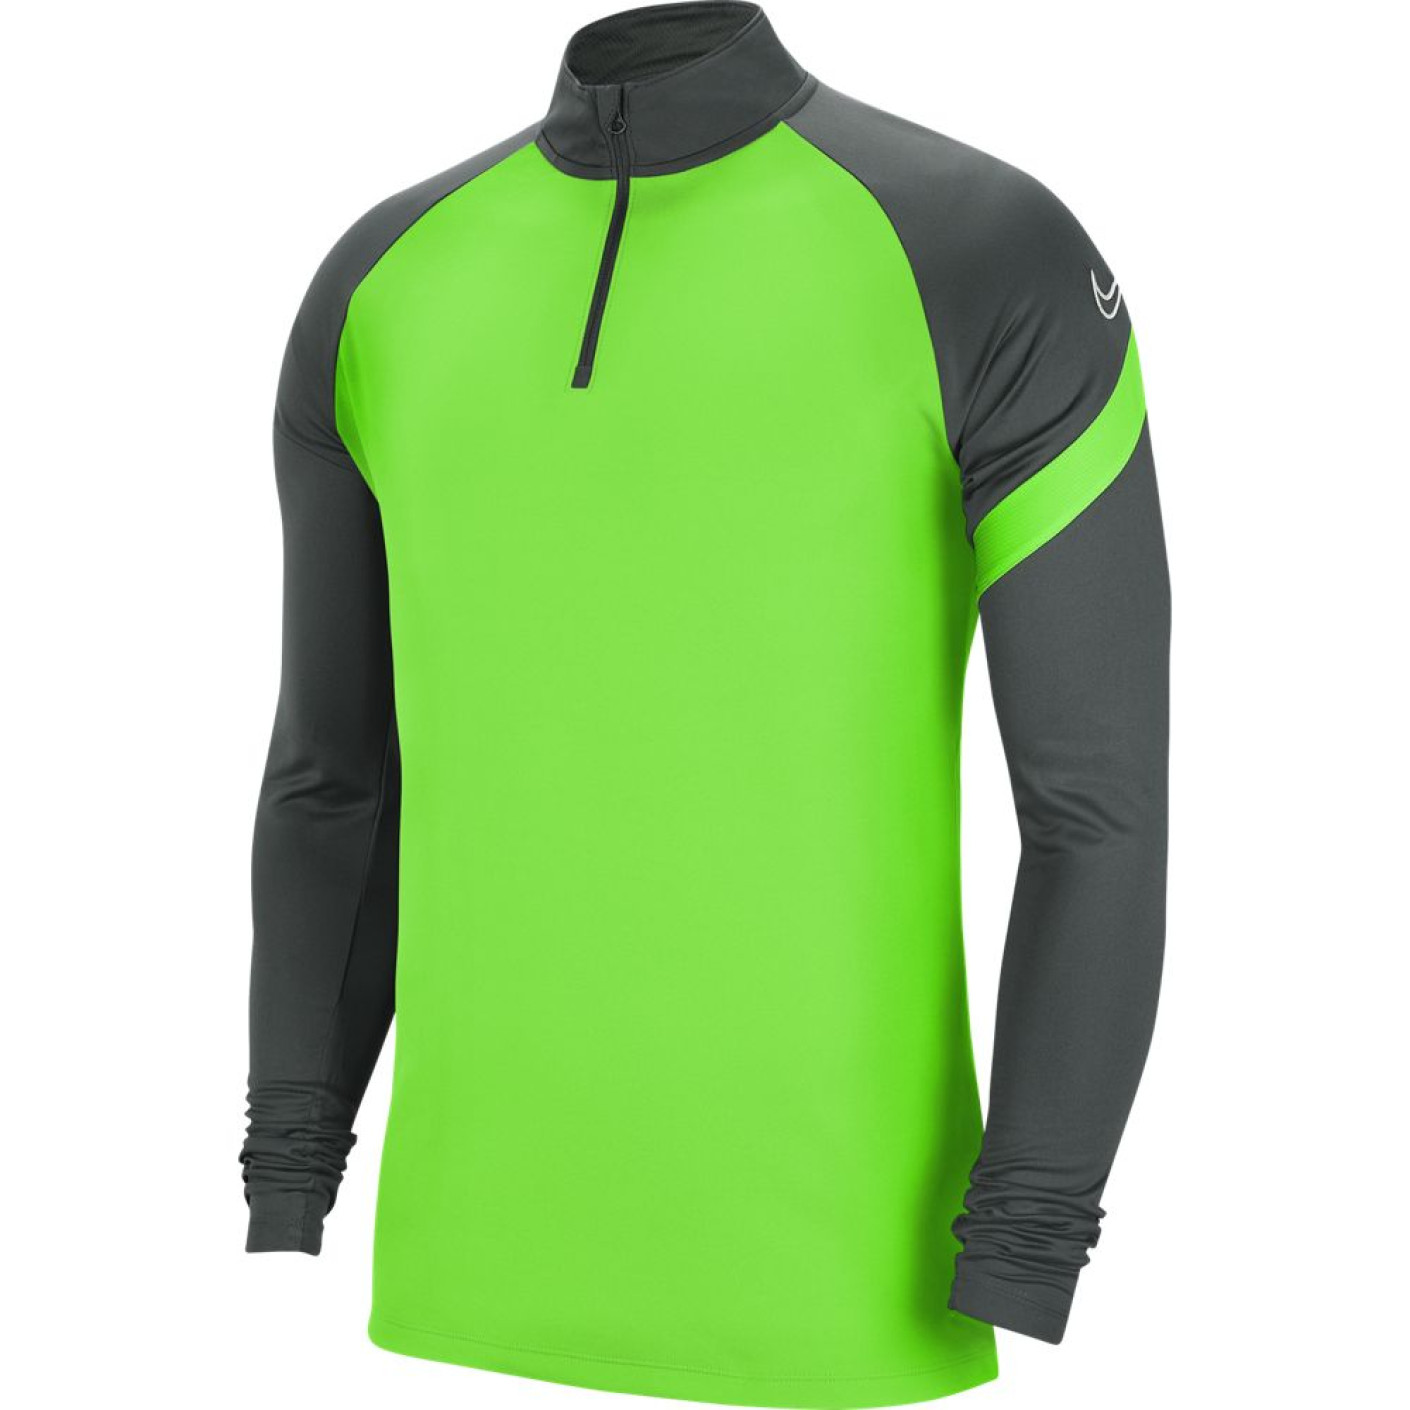 Nike Academy Training sweater Green Anthracite